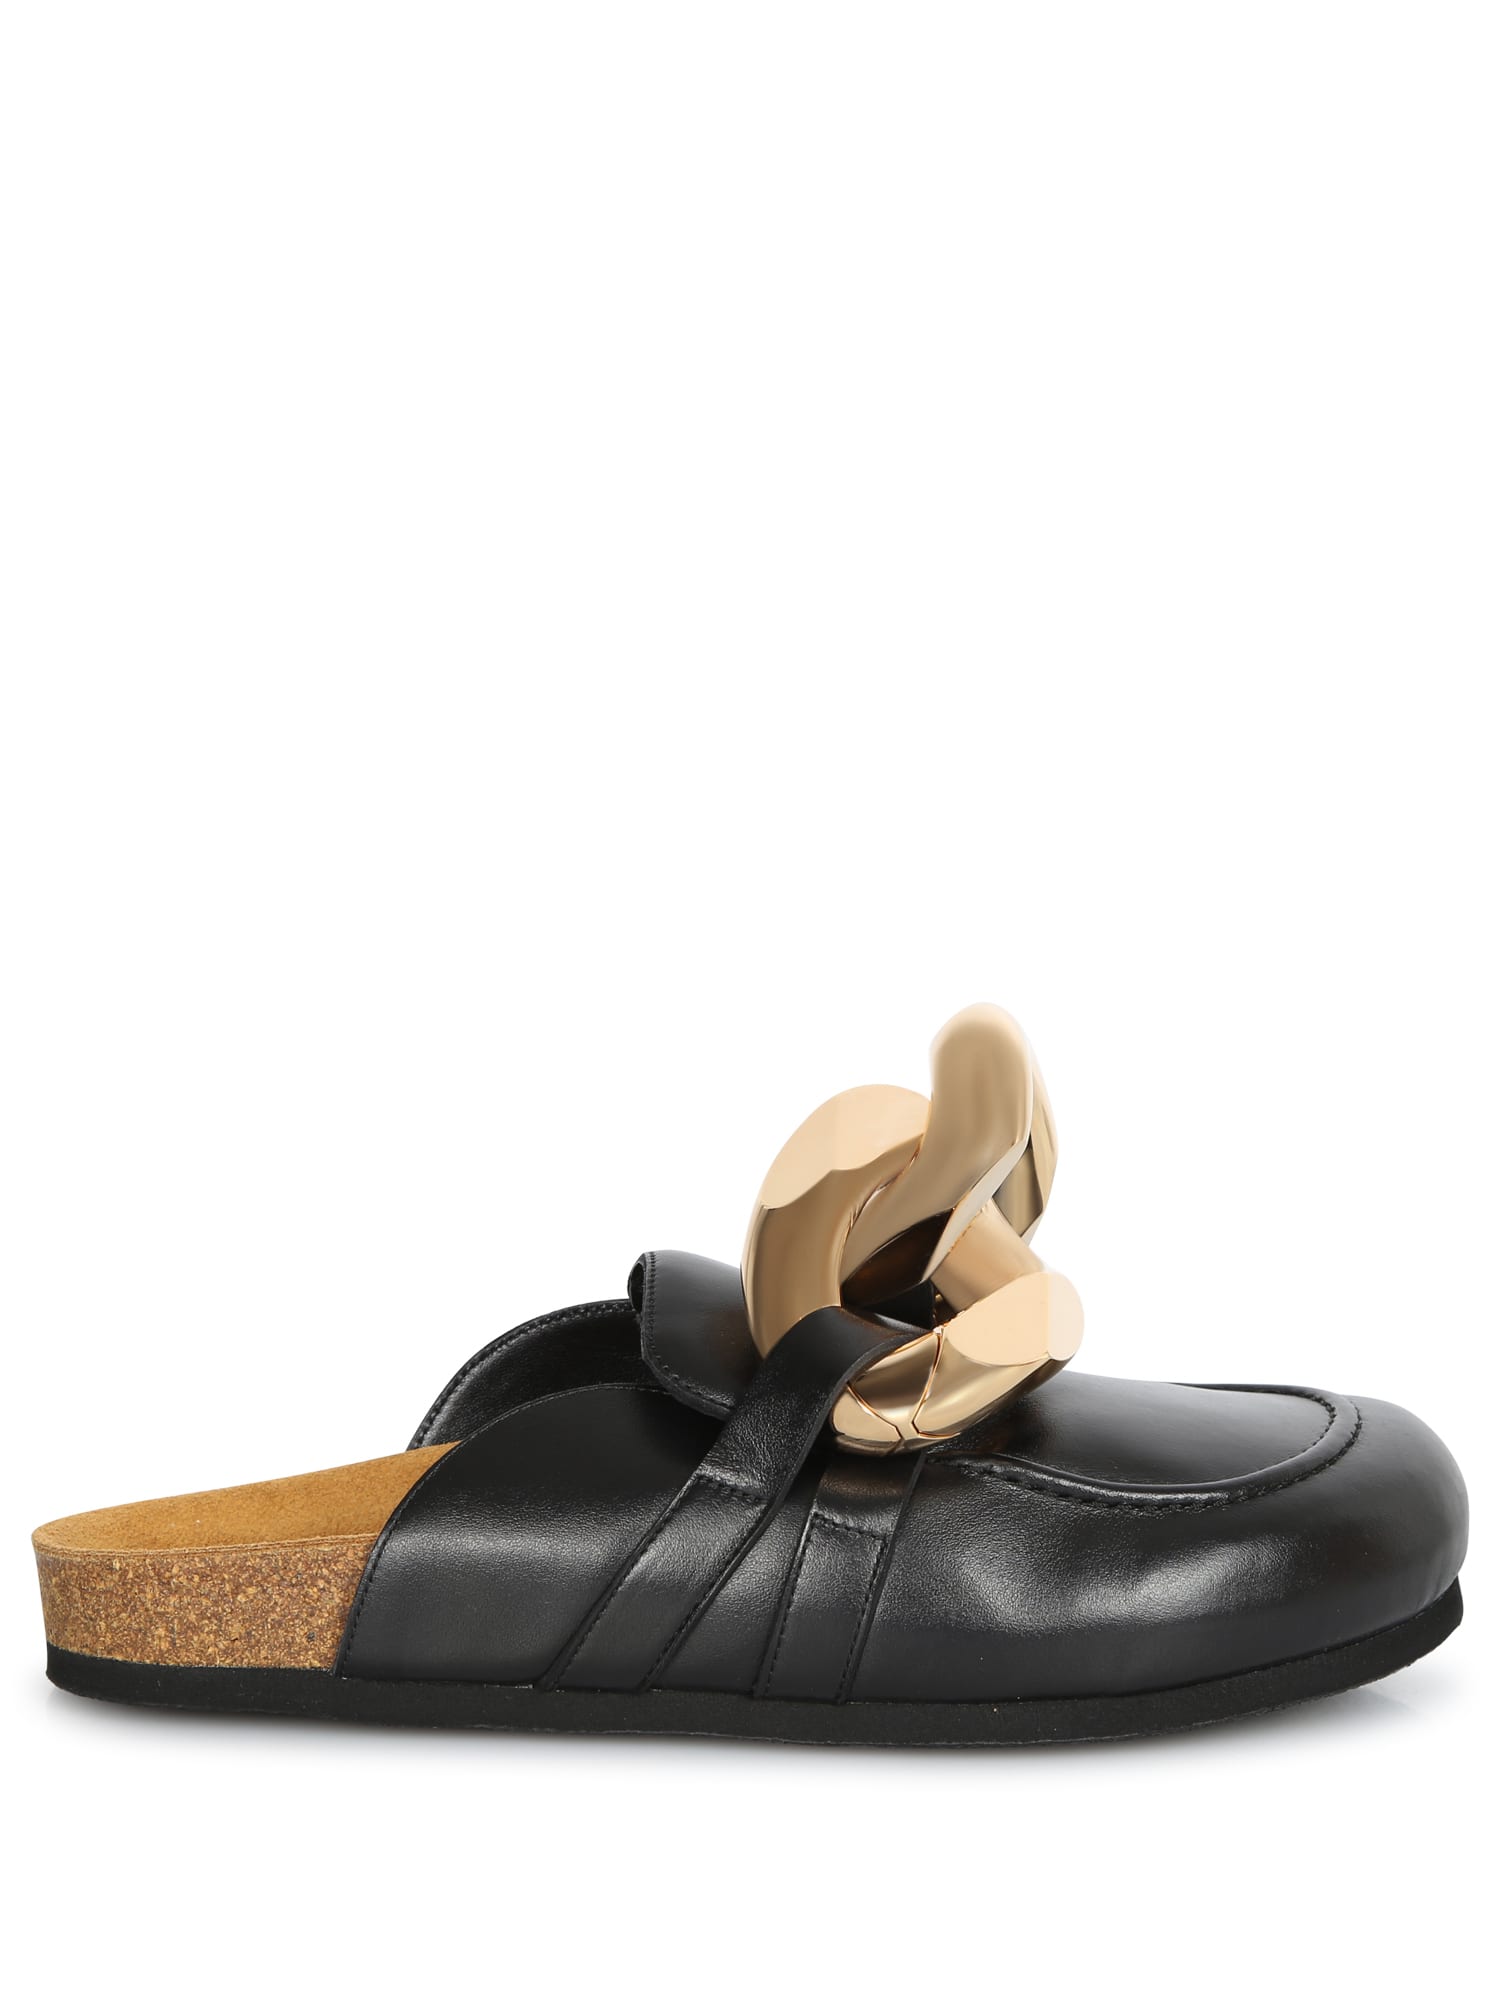 J.W. Anderson Chain Black Leather Loafers